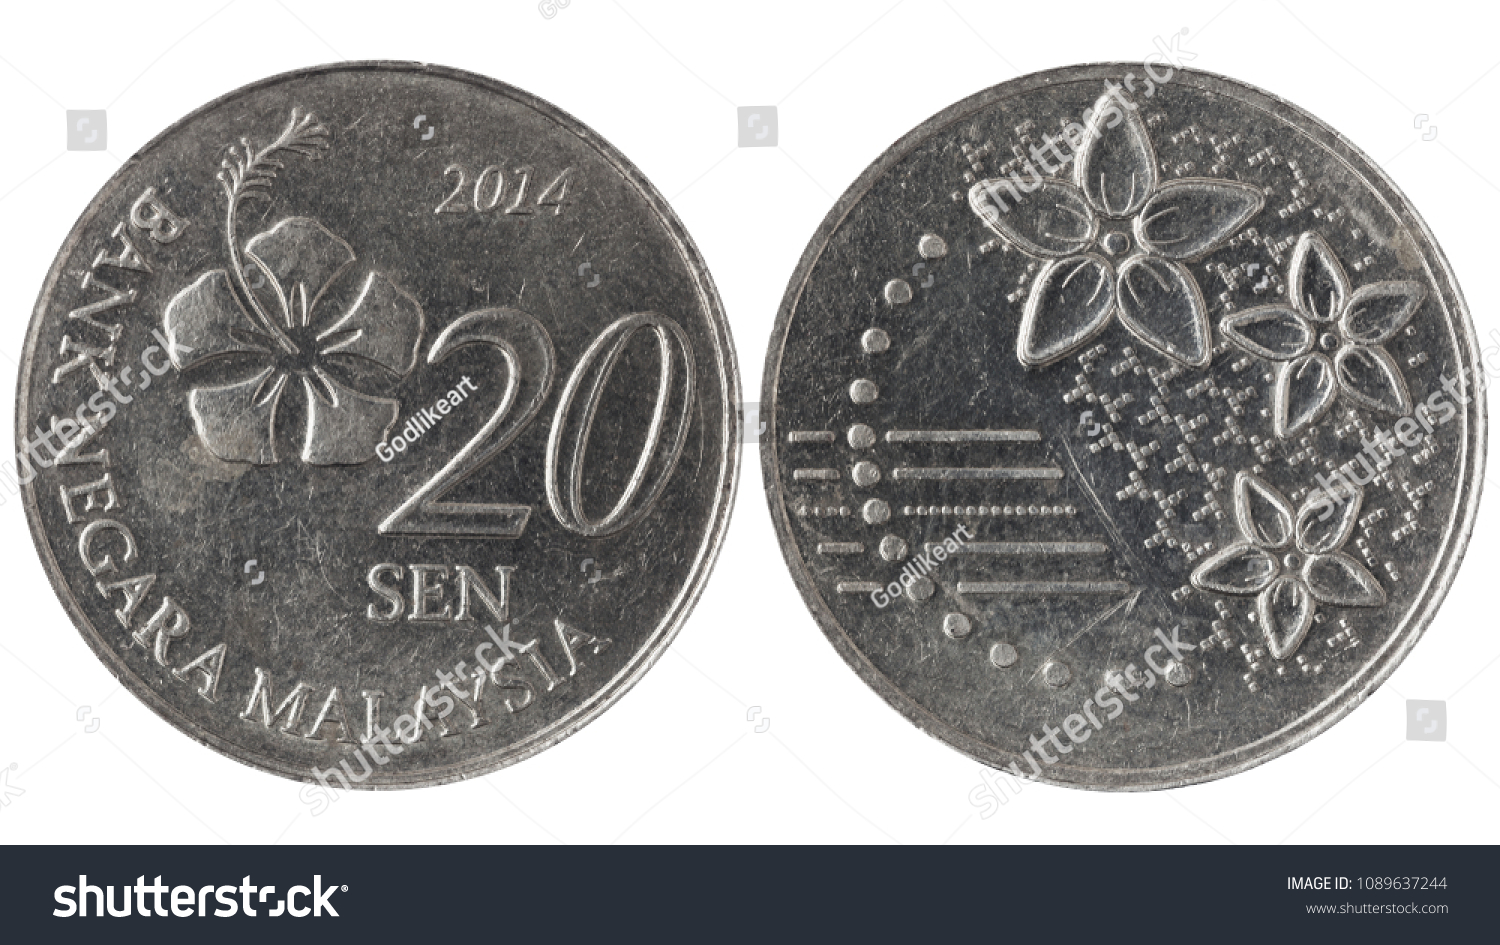 Used Malaysian 20 sen, 2014. Modern steel coin with hibiscus flower isolated on white.
 #1089637244